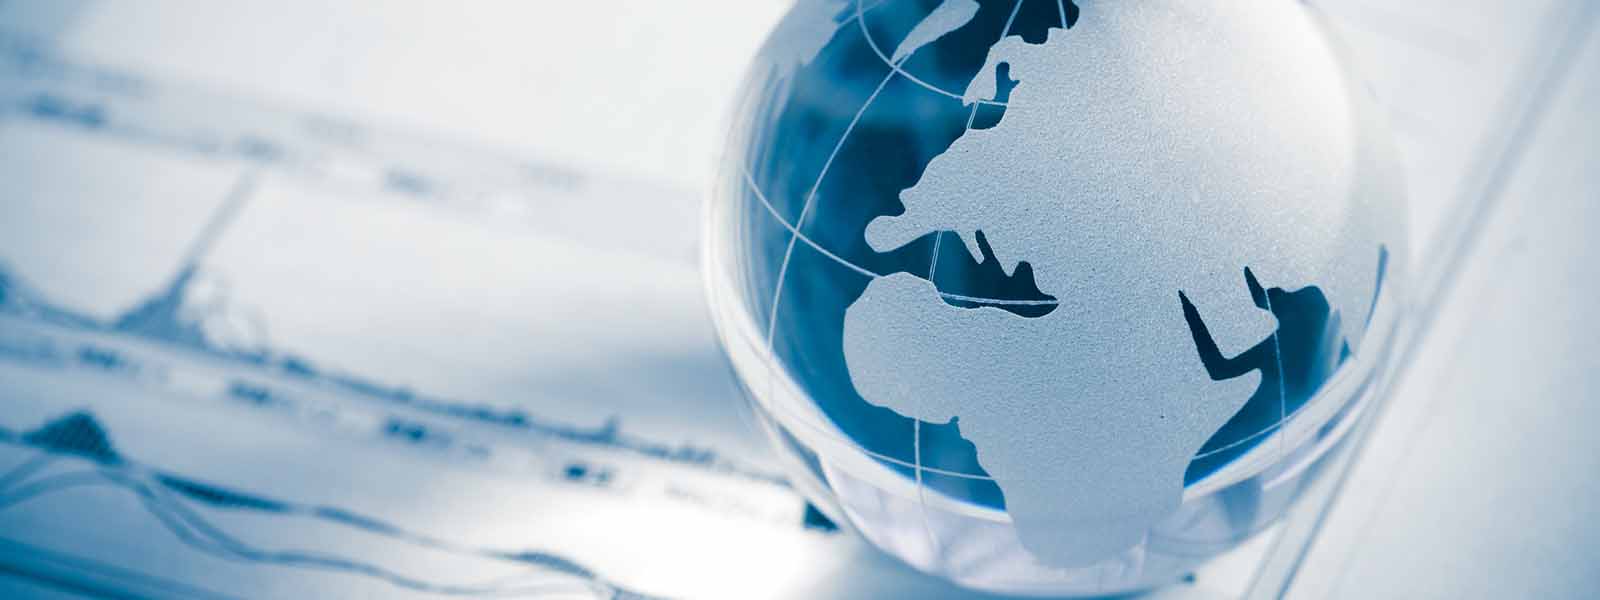 Glass globe of a map of Europe map and stock market chart on newspaper background